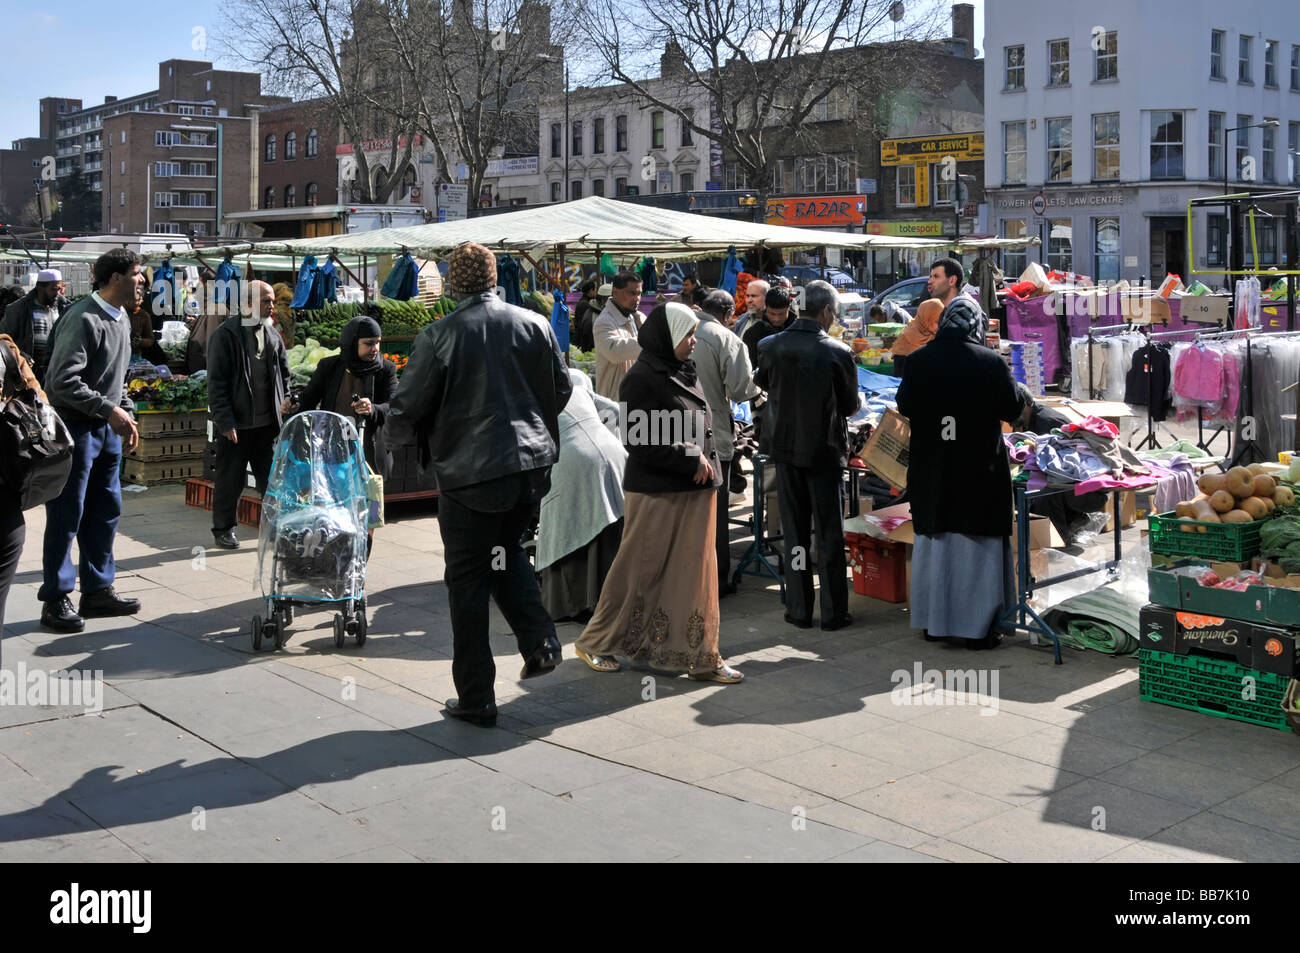 Shoppers on pavement around stalls in busy crowded Whitechapel outdoor street market in East London Borough of Tower Hamlets England UK Stock Photo